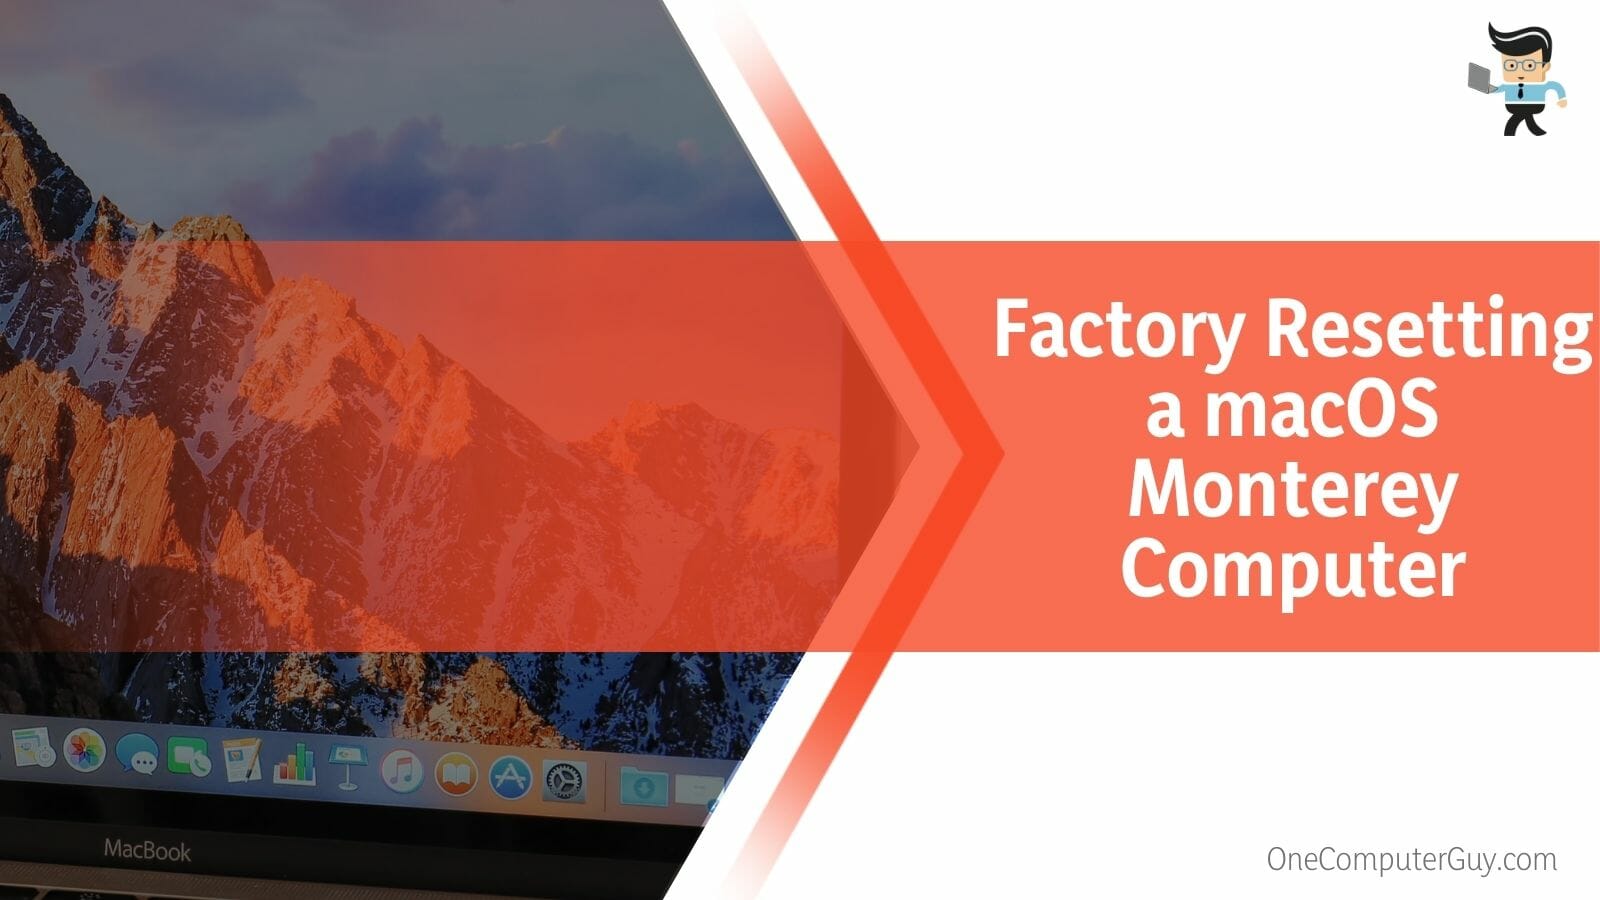 Factory Resetting a macOS Monterey Computer